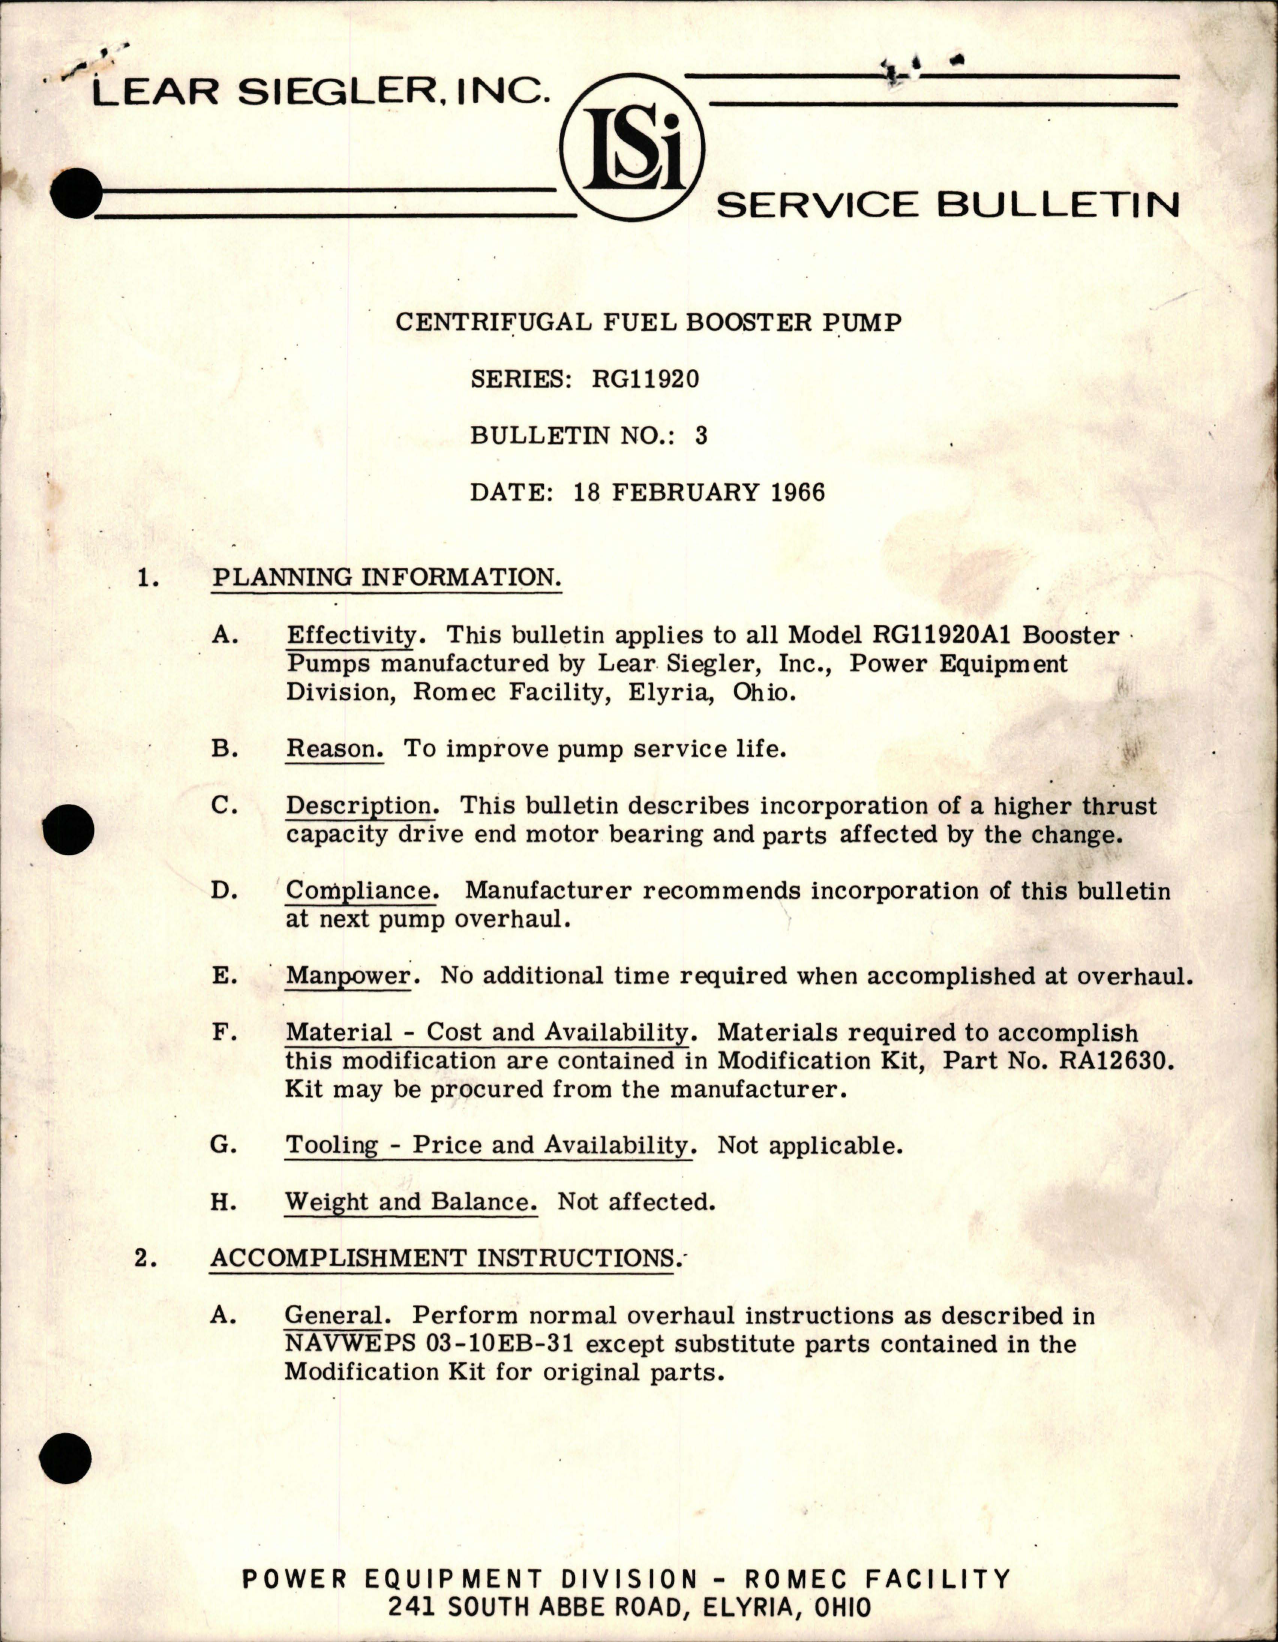 Sample page 1 from AirCorps Library document: Centrifugal Fuel Booster Pump - Series RG11920 